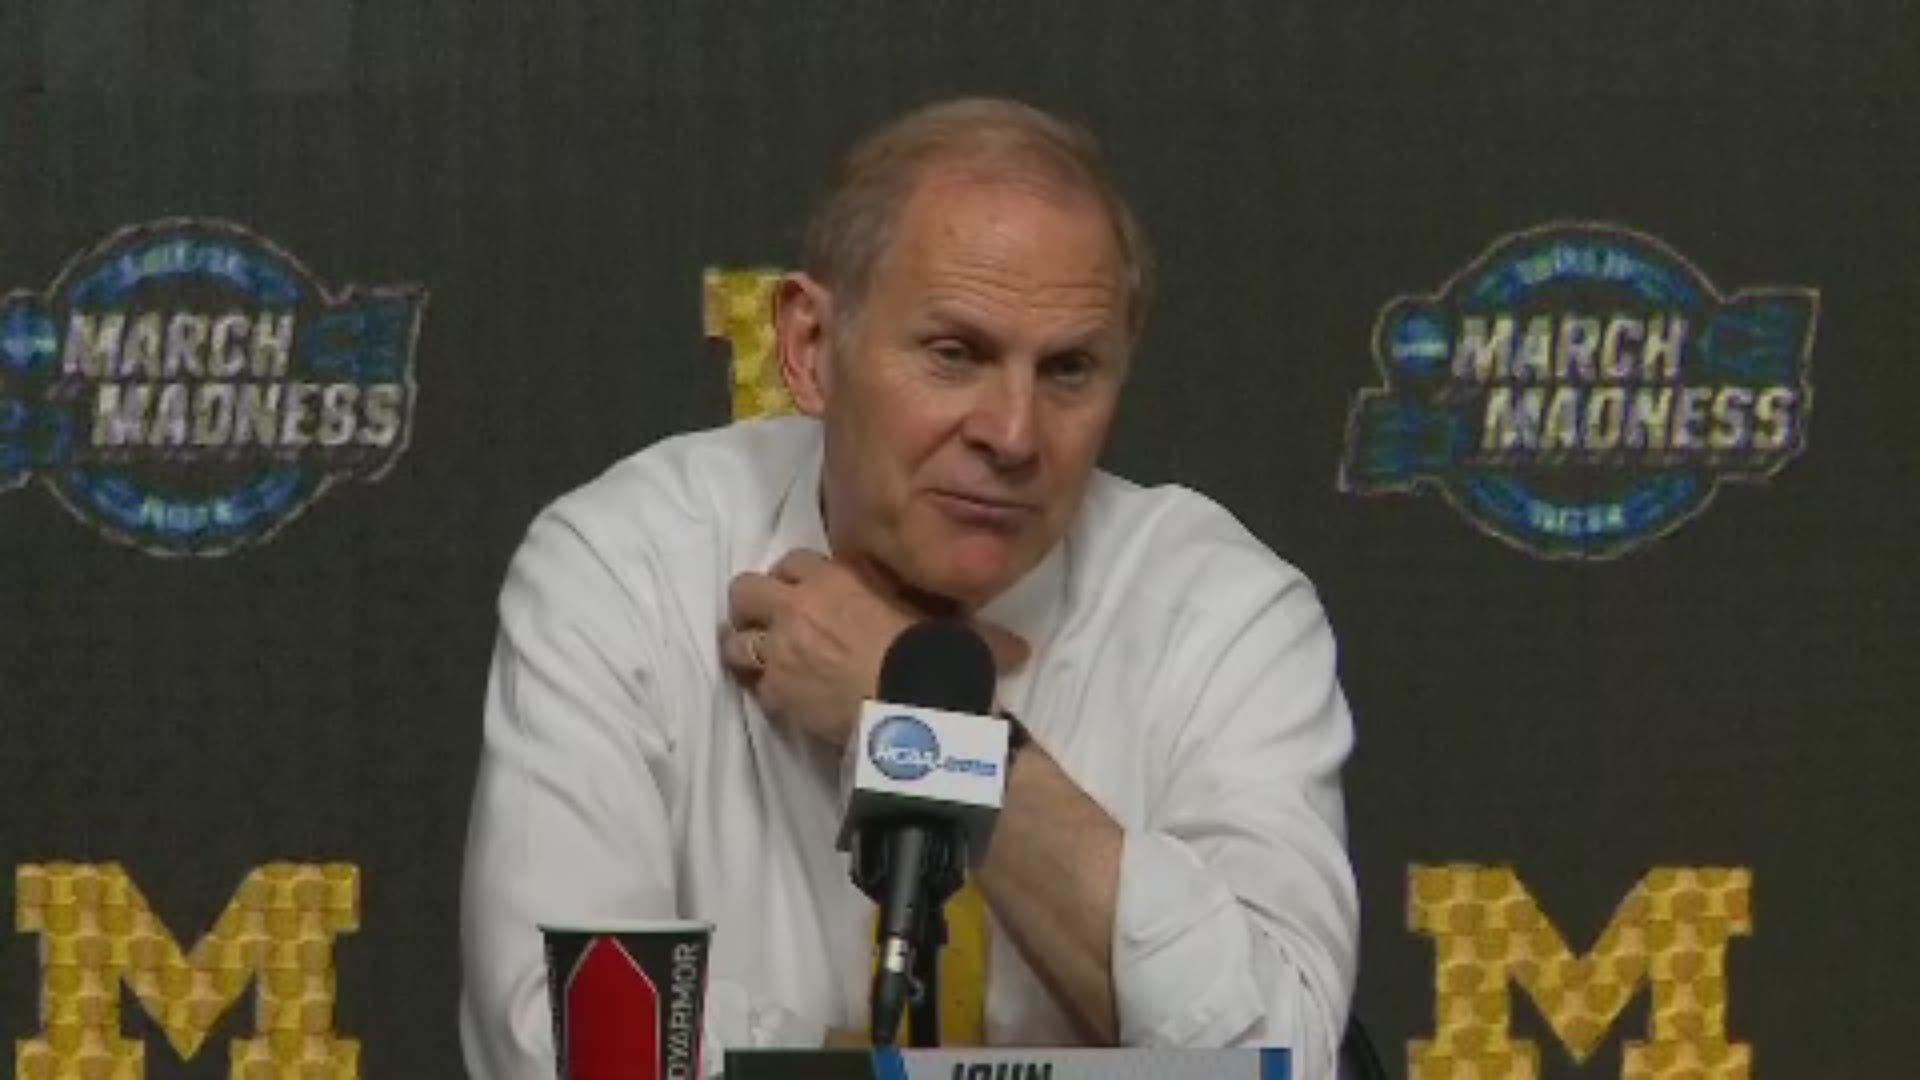 After a loss to Texas Tech in the Sweet 16, Michigan head coach, John Beilein was asked about a bright spot in his day when his son Patrick became the head coach at Niagara University.